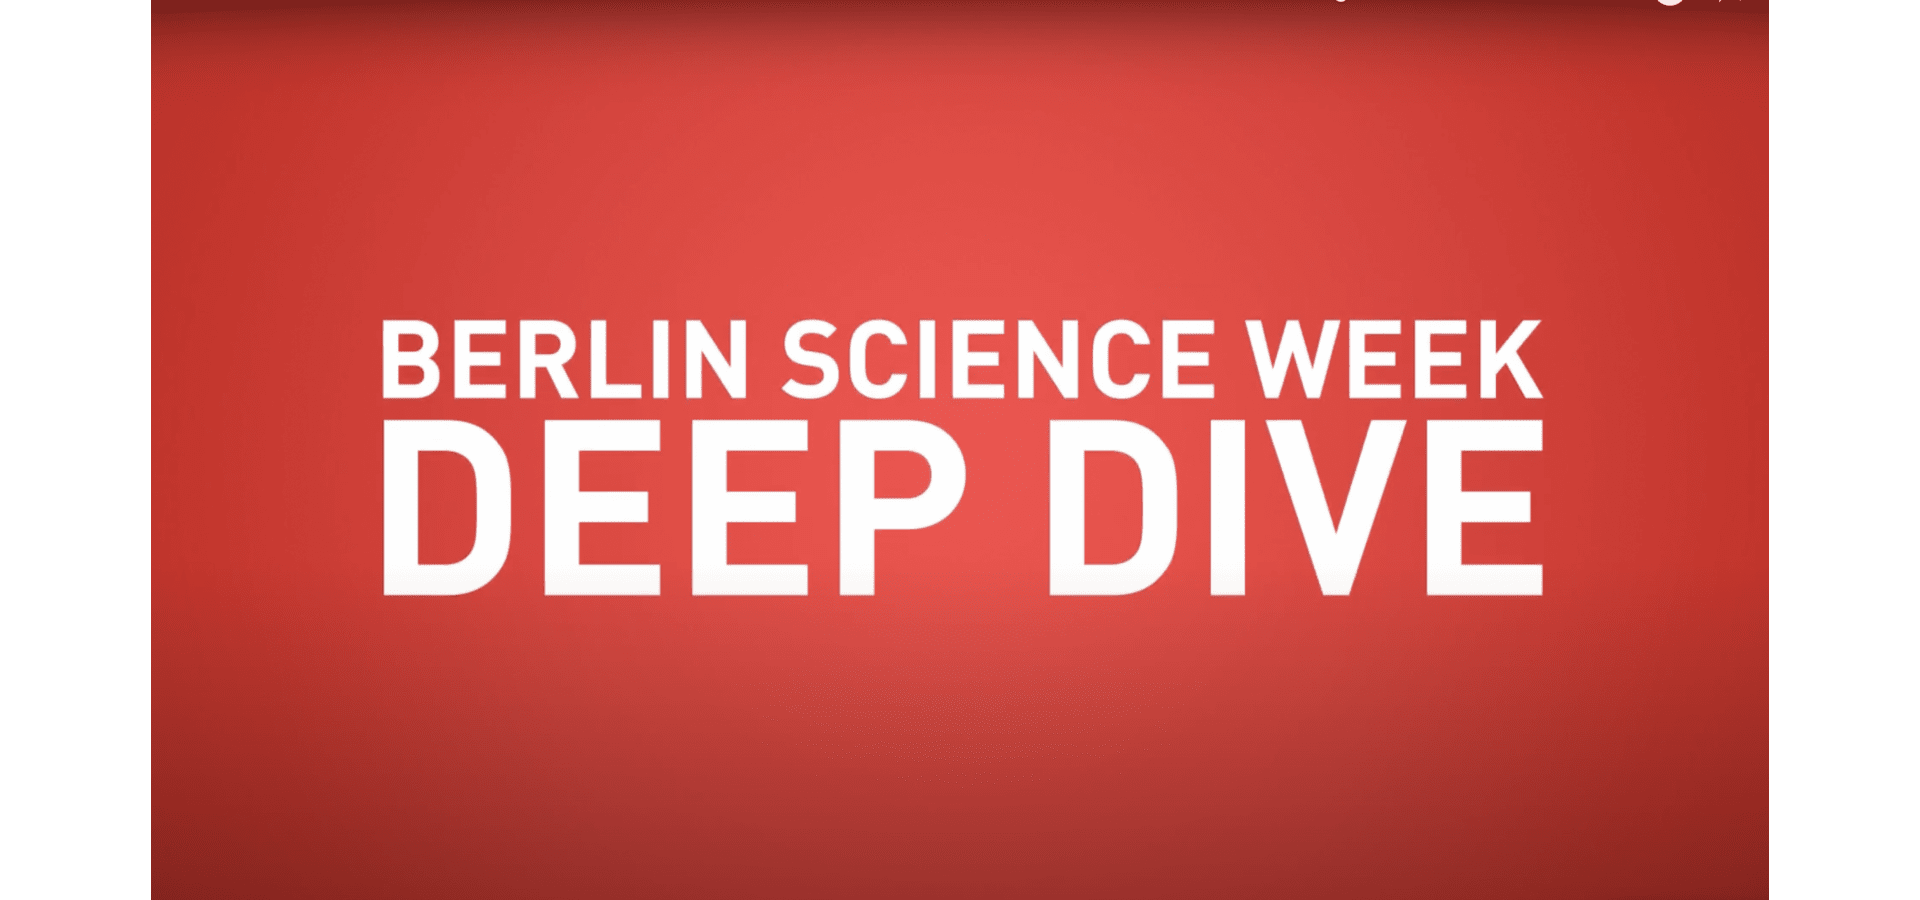 The Berlin Science Week interviews David Bierbach in an exciting new video